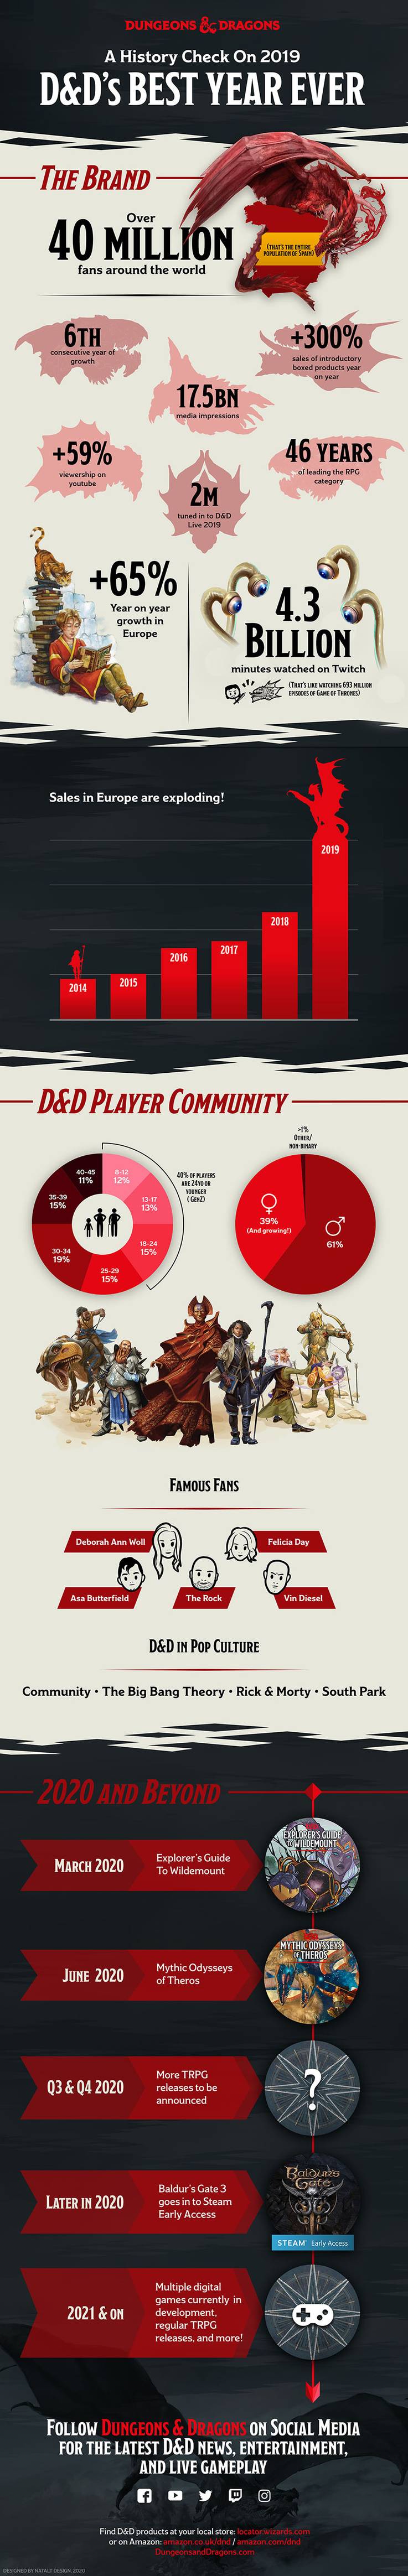 Dungeons-And-Dragons-Offical-Infographic.jpg